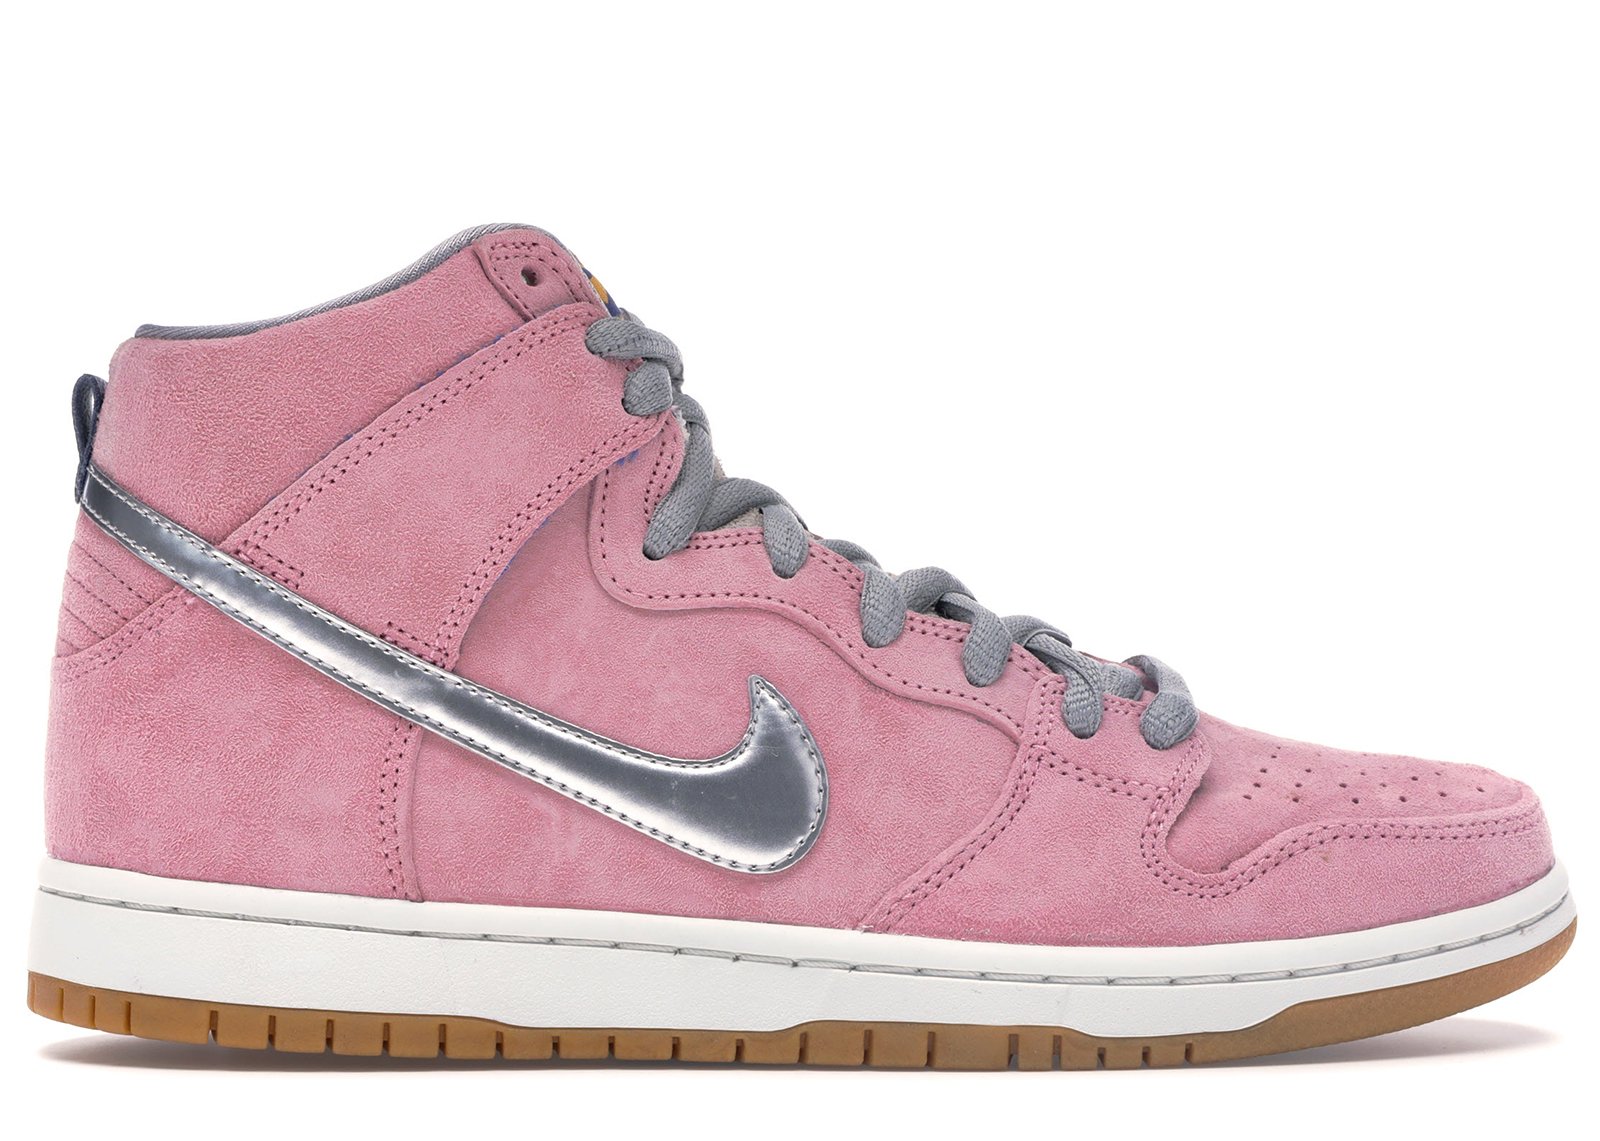 Nike Dunk SB High Concepts When Pigs Fly sneakers